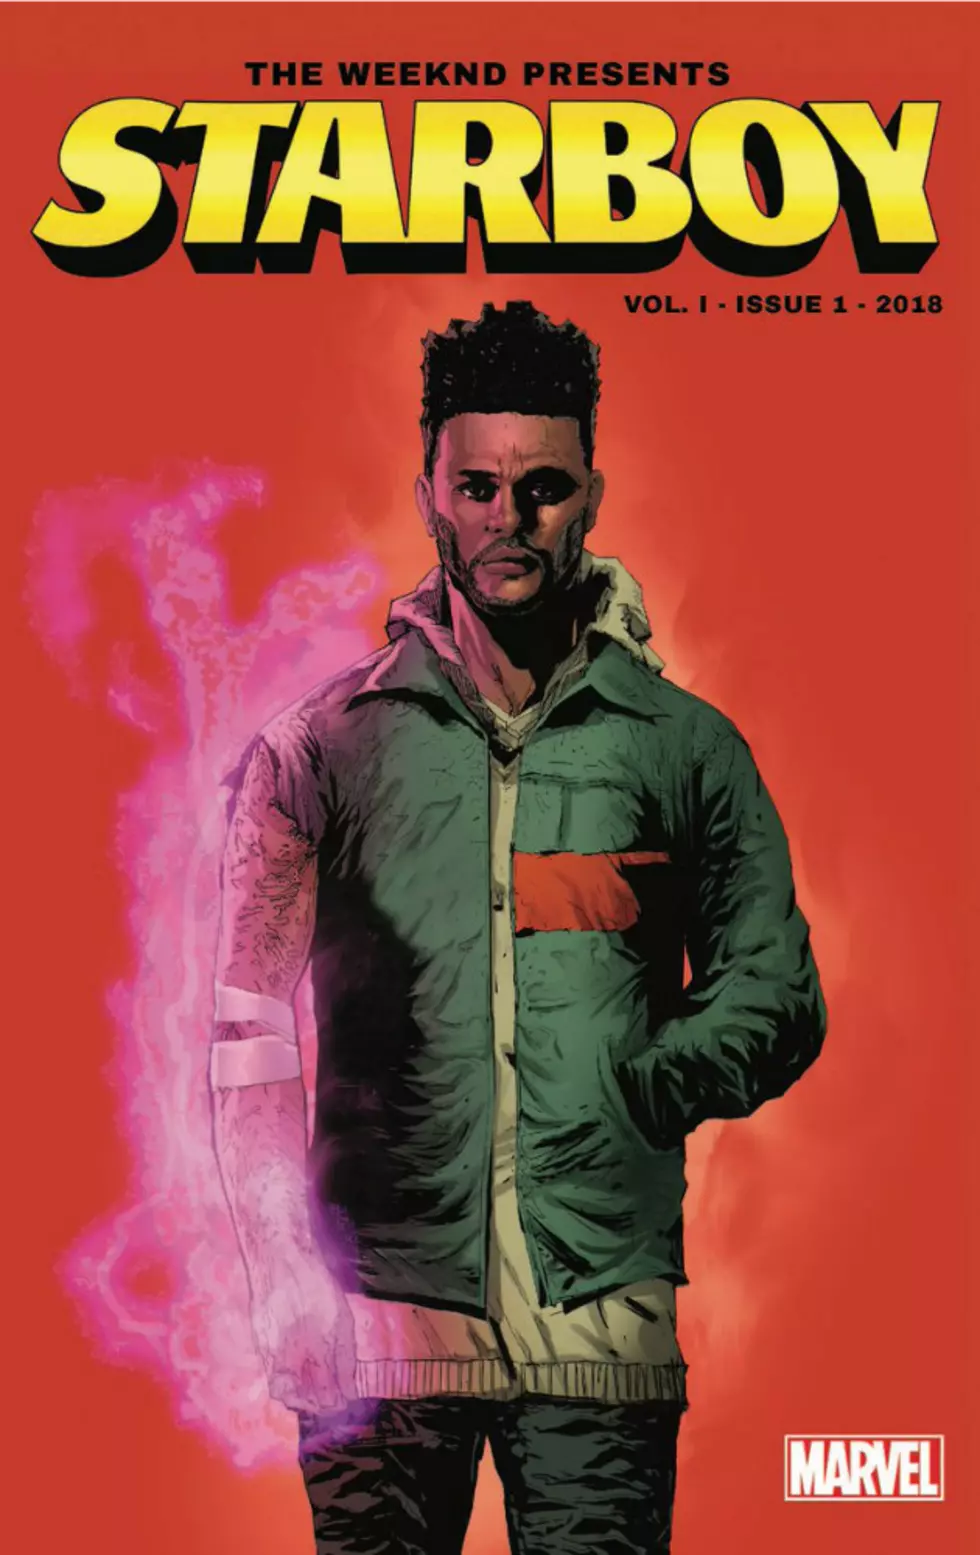 The Weeknd Teases Marvel Collaboration